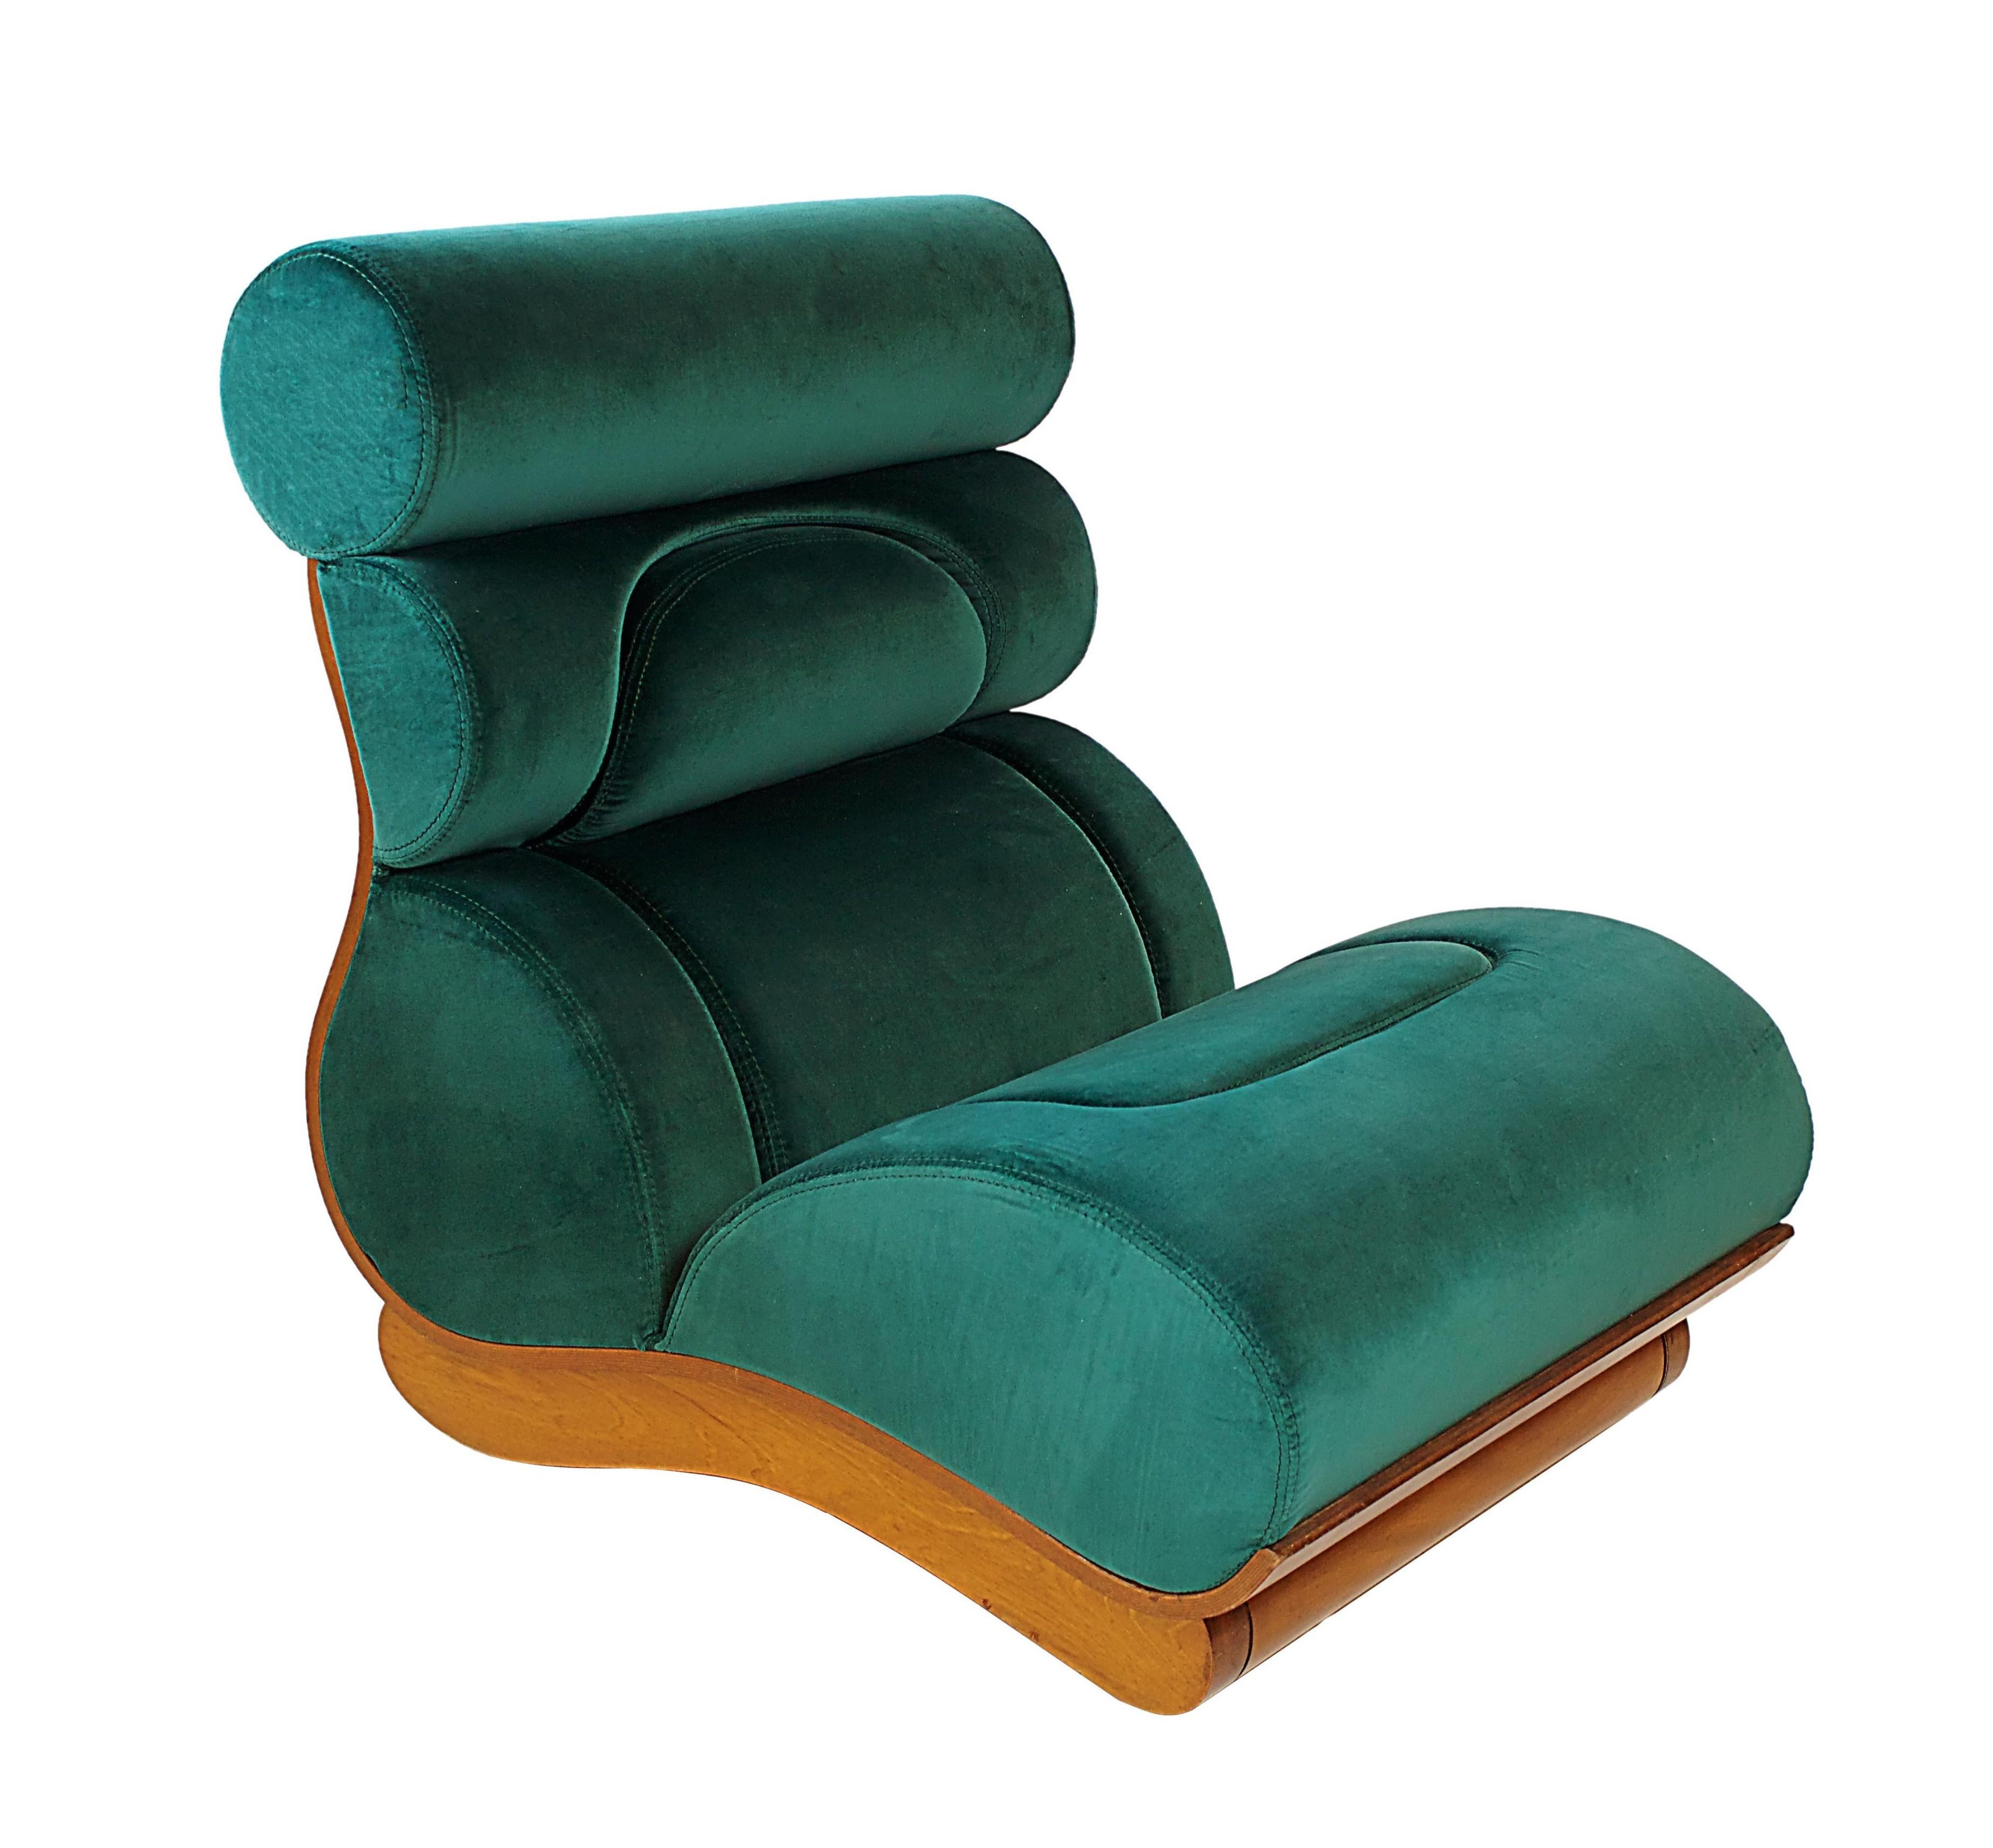 Mid-20th Century French Modern Walnut and Turquoise Velvet Upholstered Chair